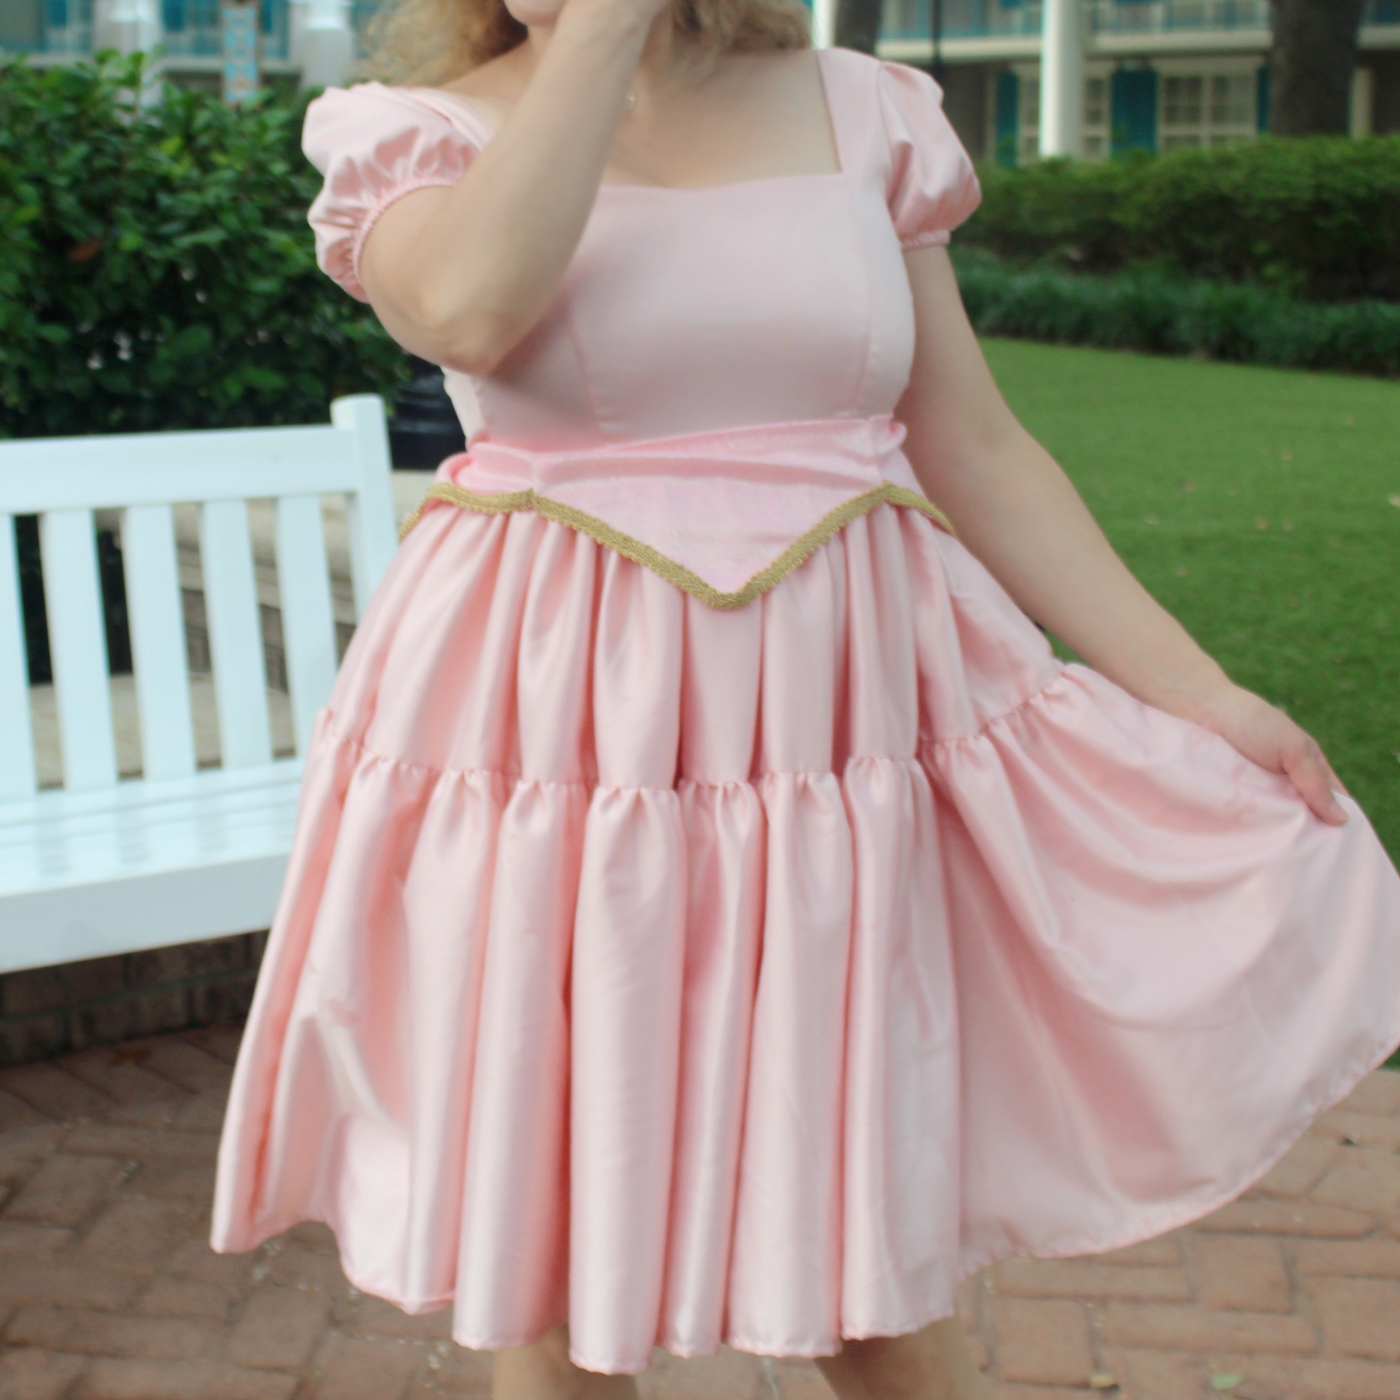 Once Upon a Twirl: Aurora's Enchantment Adult dress